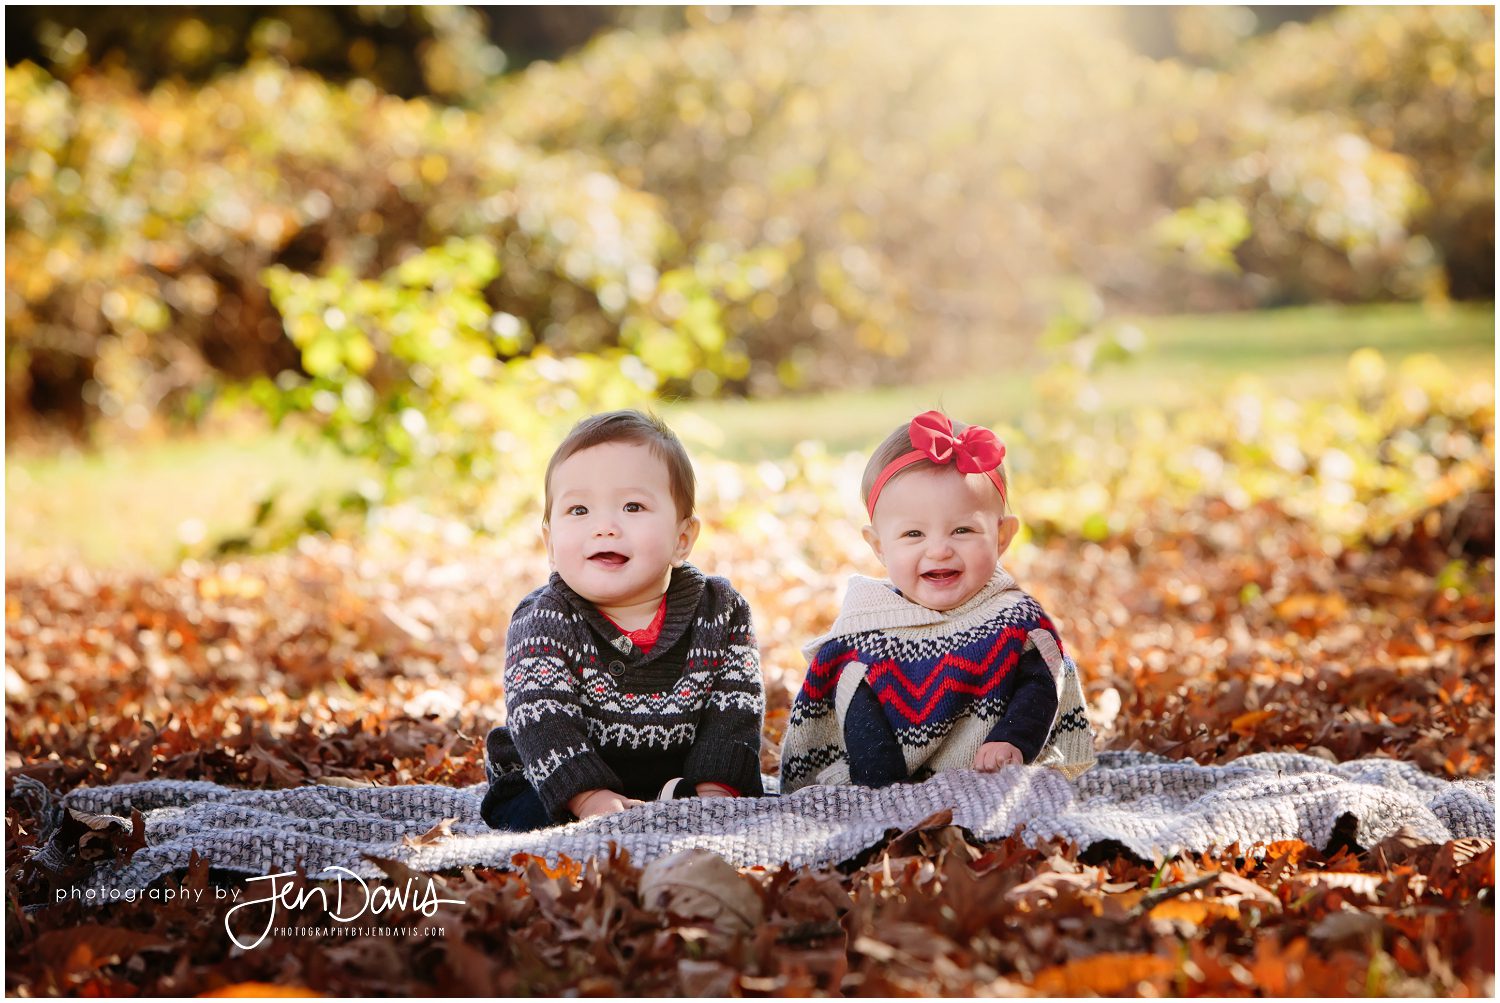 7 month old twins sitting on a blanket in fall